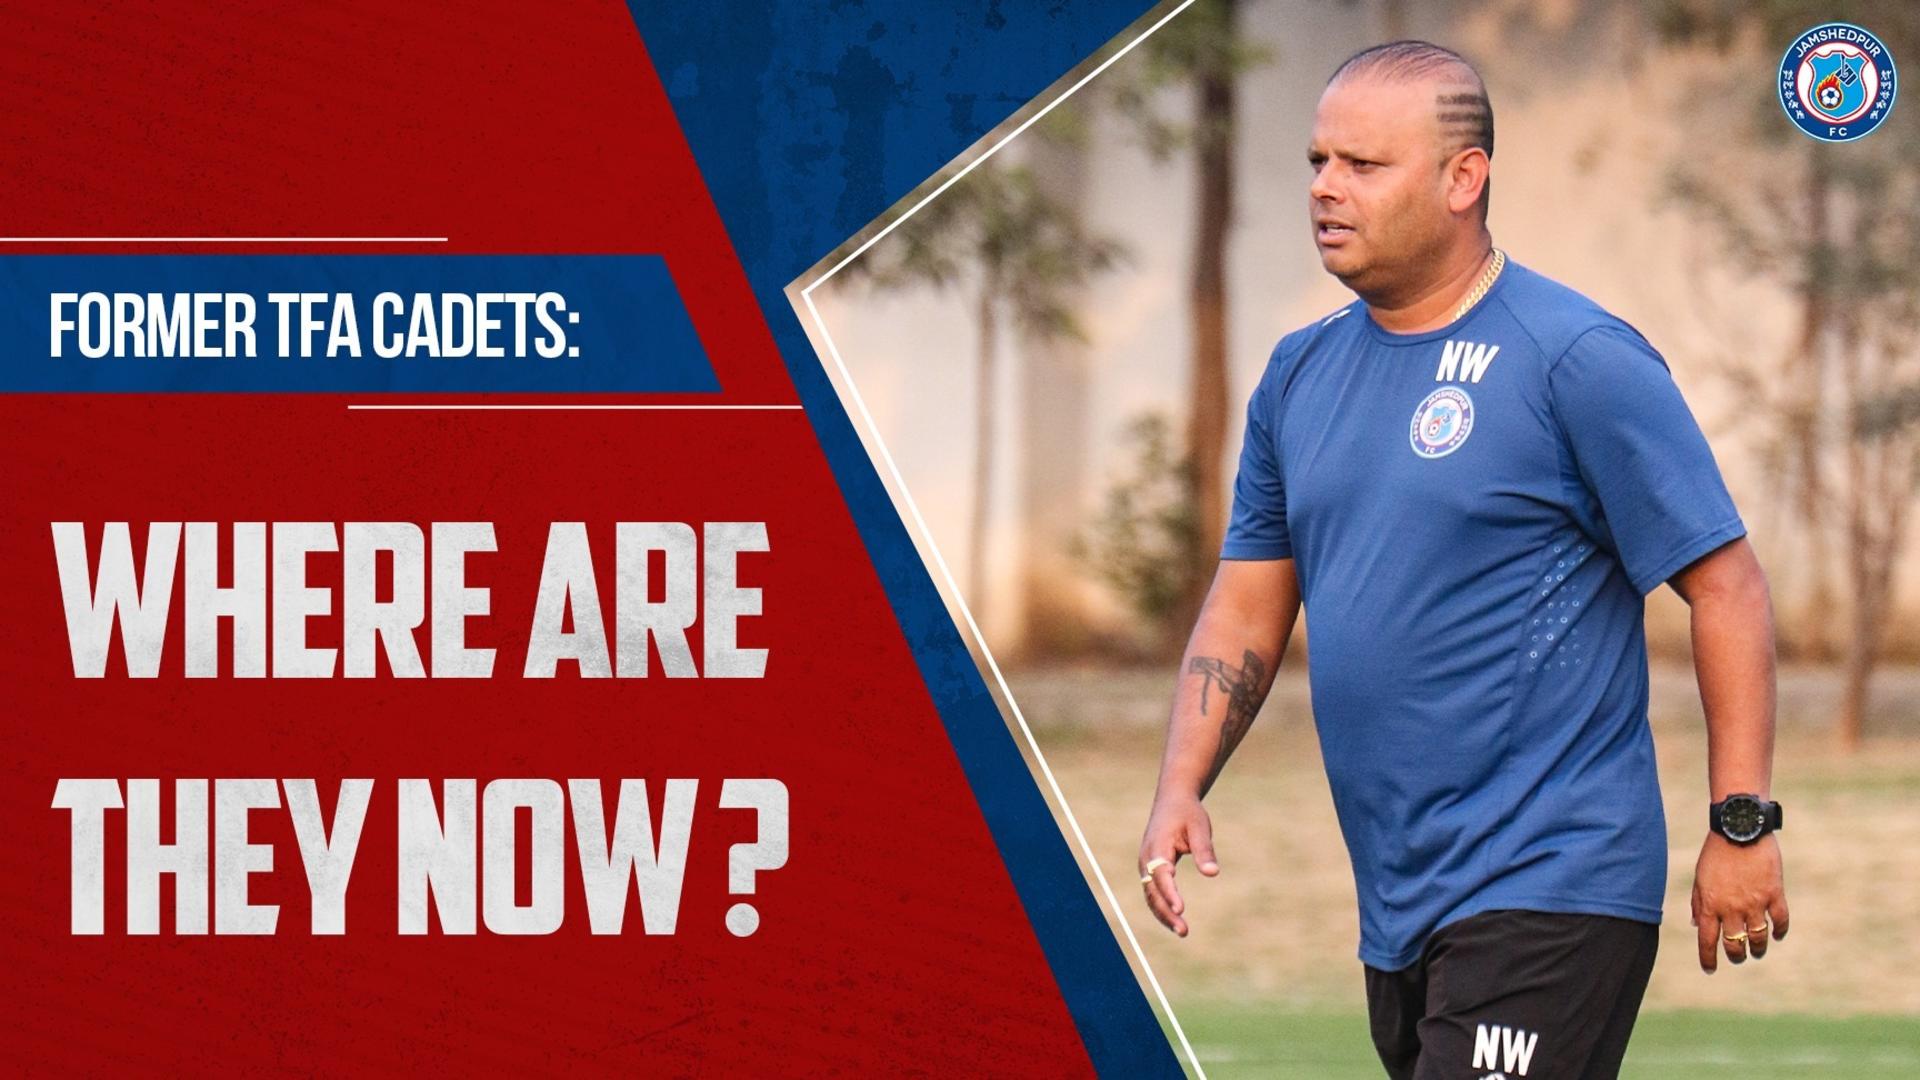 Former Tfa Cadet And Jamshedpur Fc Assistant Coach Noel Wilson Shares His  Experience And Advice Ahead Of U17 Trials - Jamshedpur Football Club